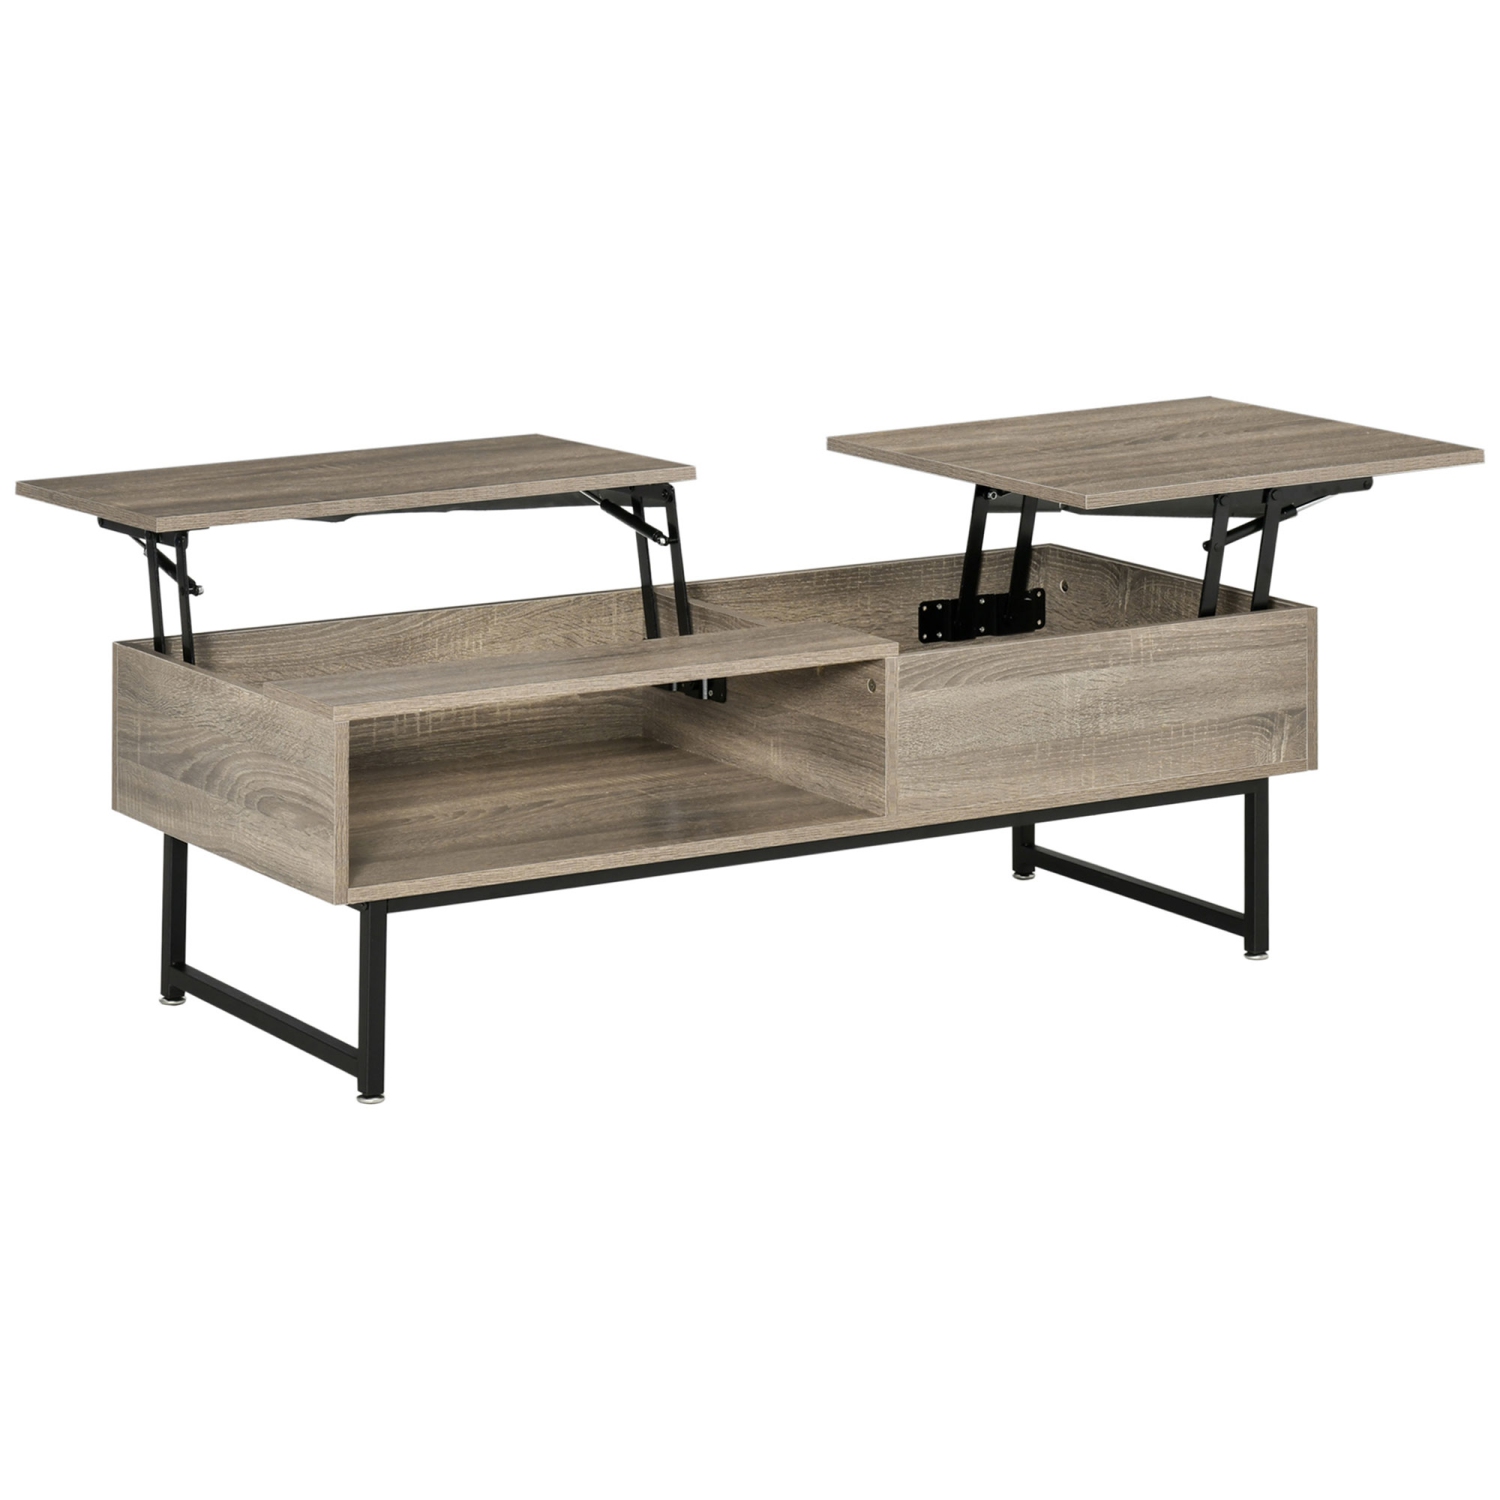 HOMCOM Modern Lift Top Coffee Table with Hidden Storage Compartment and Metal Frame, Center Table for Living Room, Grey